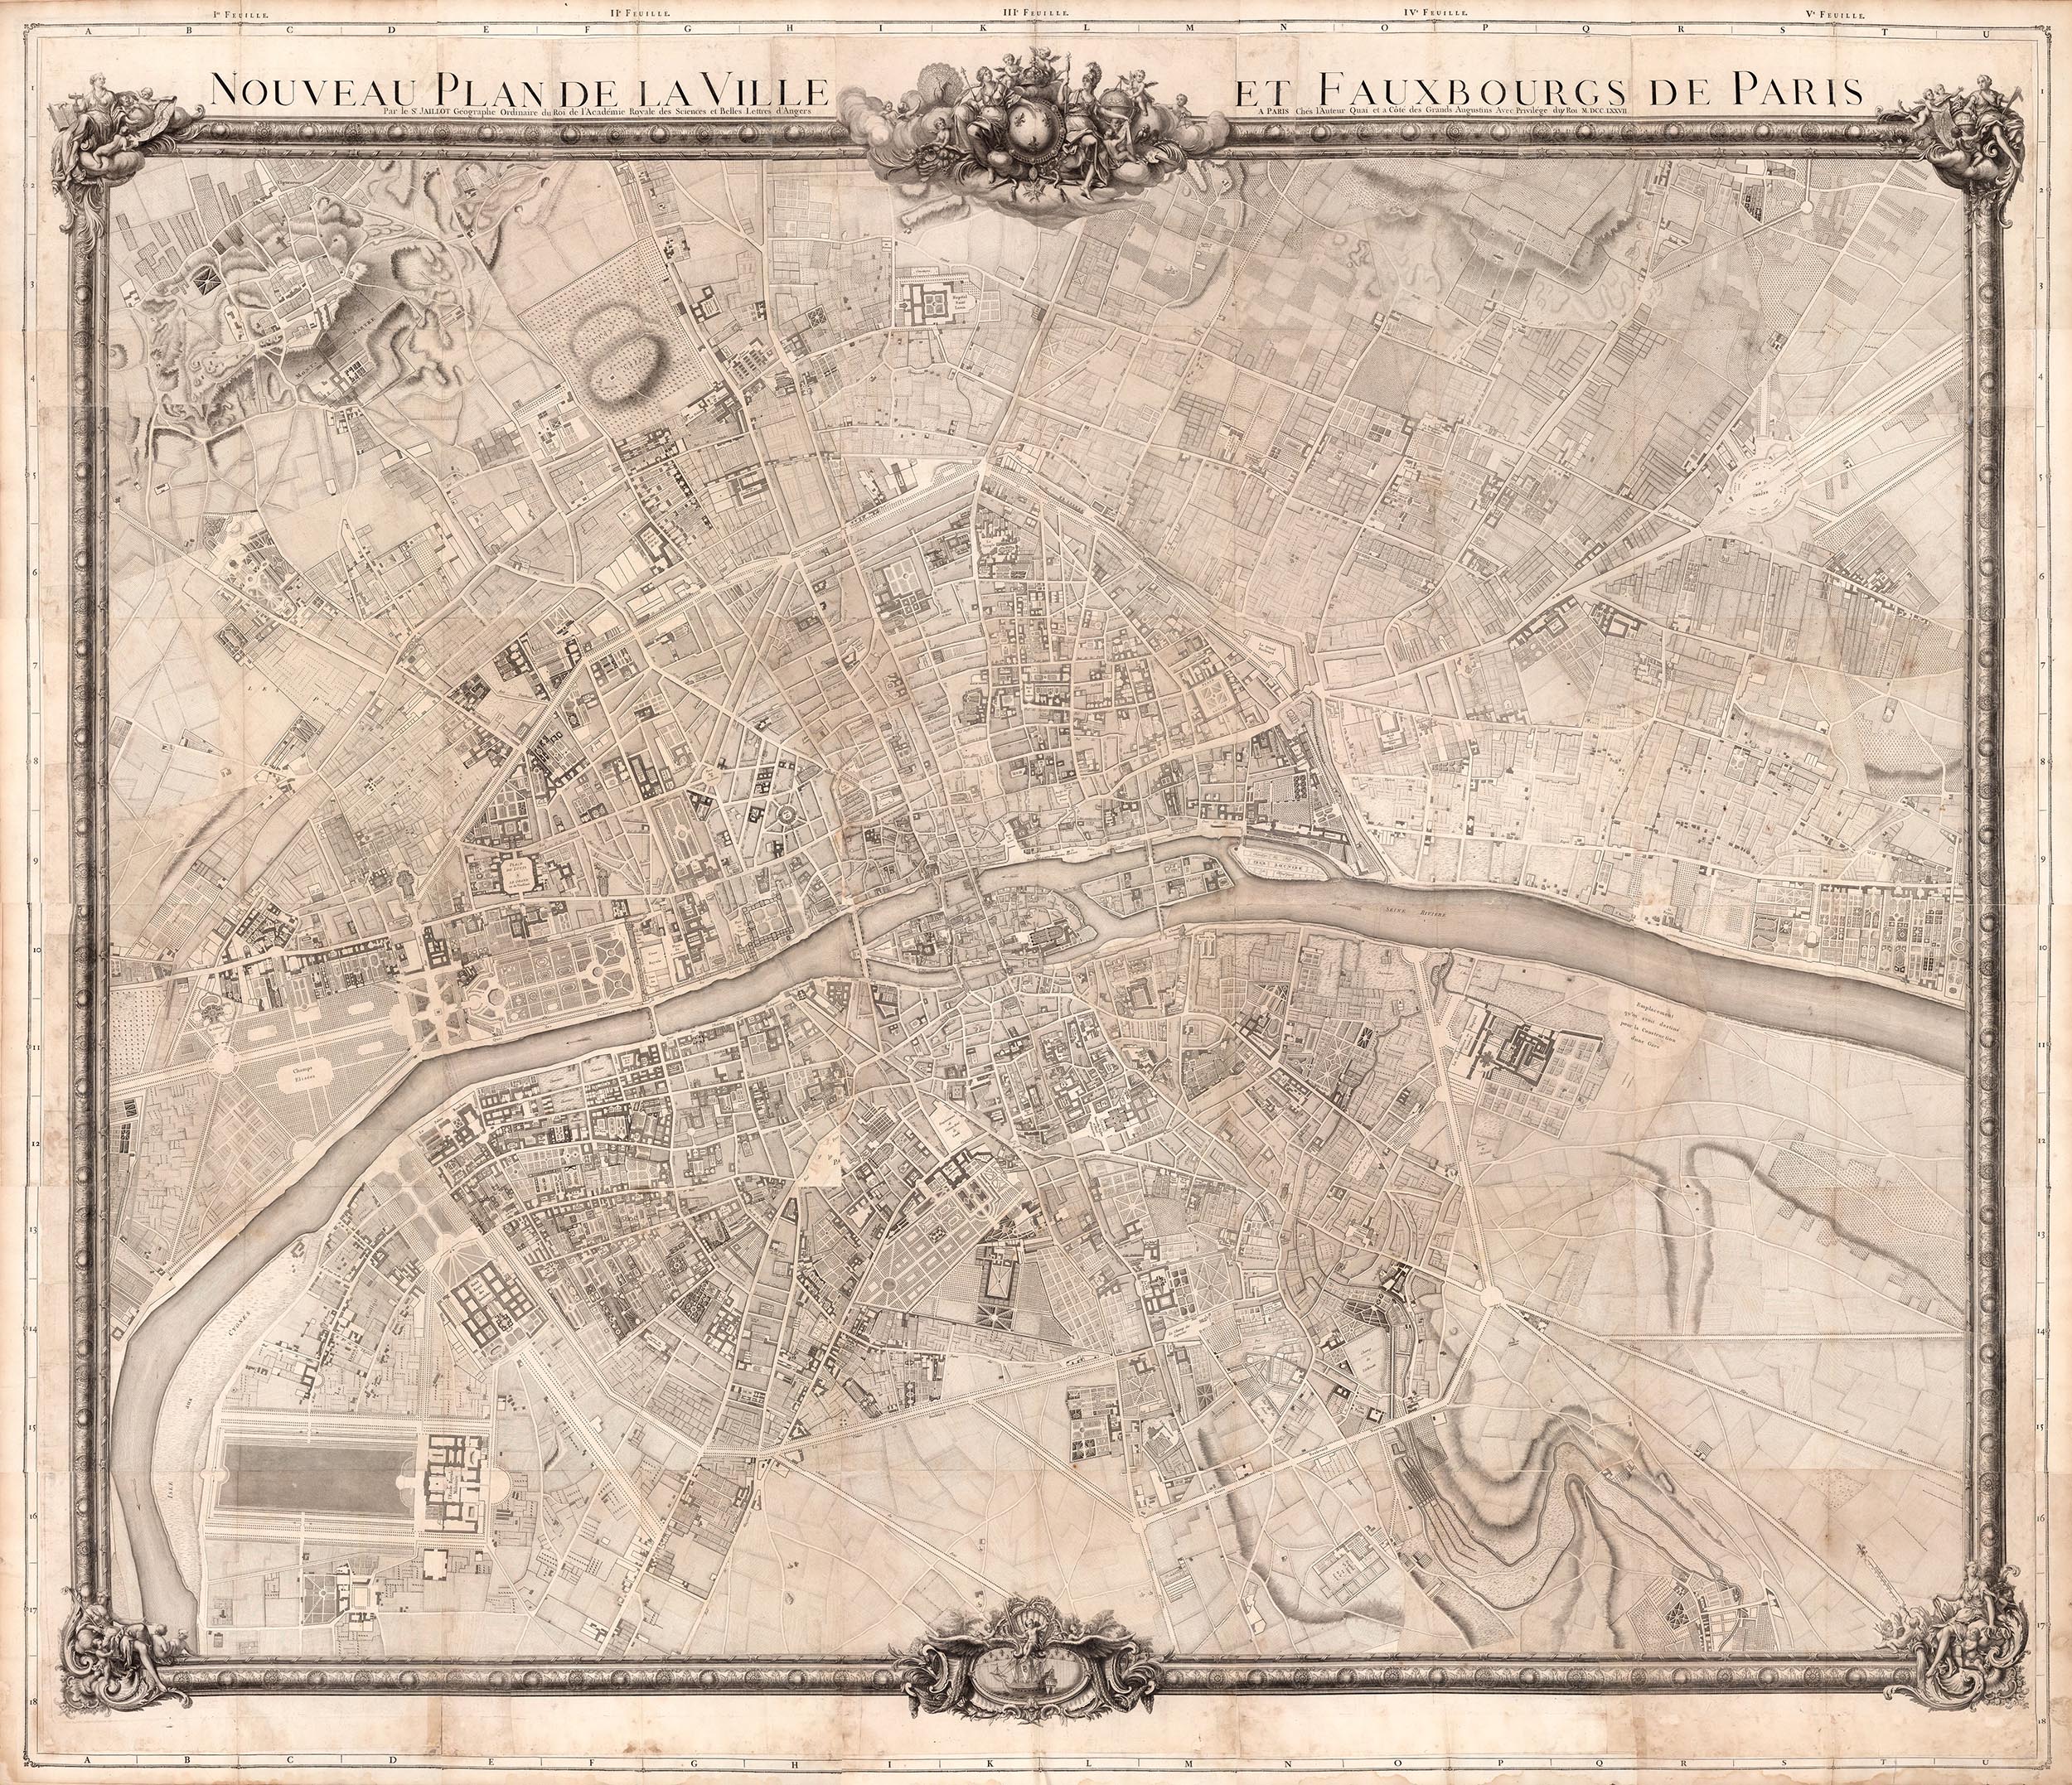 David Rumsey Historical Map Collection